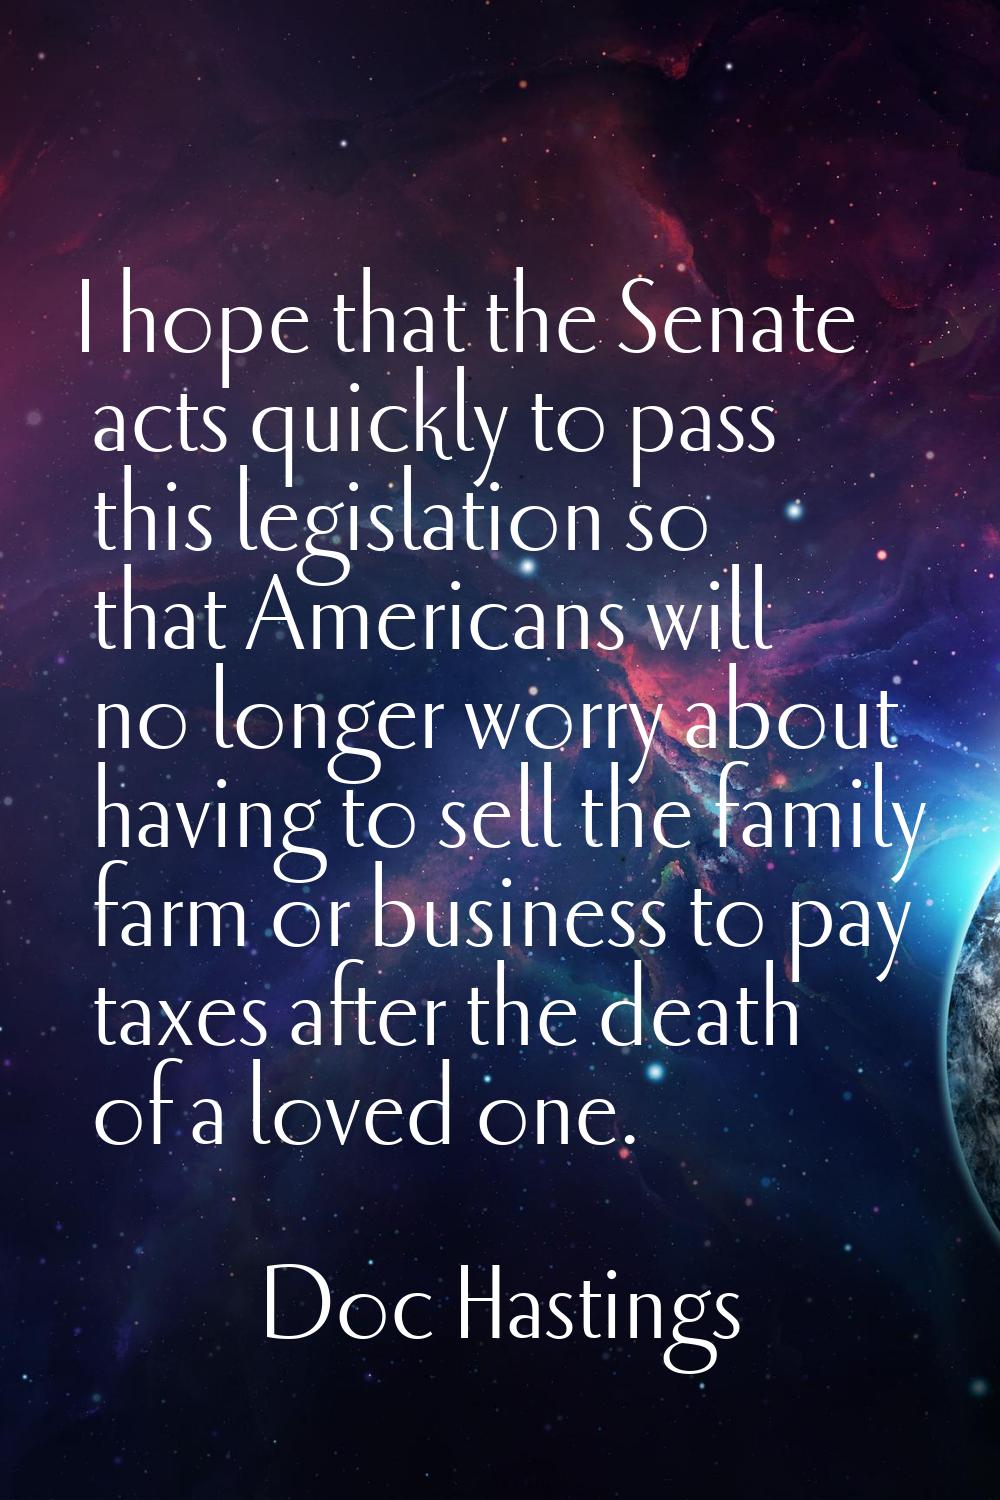 I hope that the Senate acts quickly to pass this legislation so that Americans will no longer worry